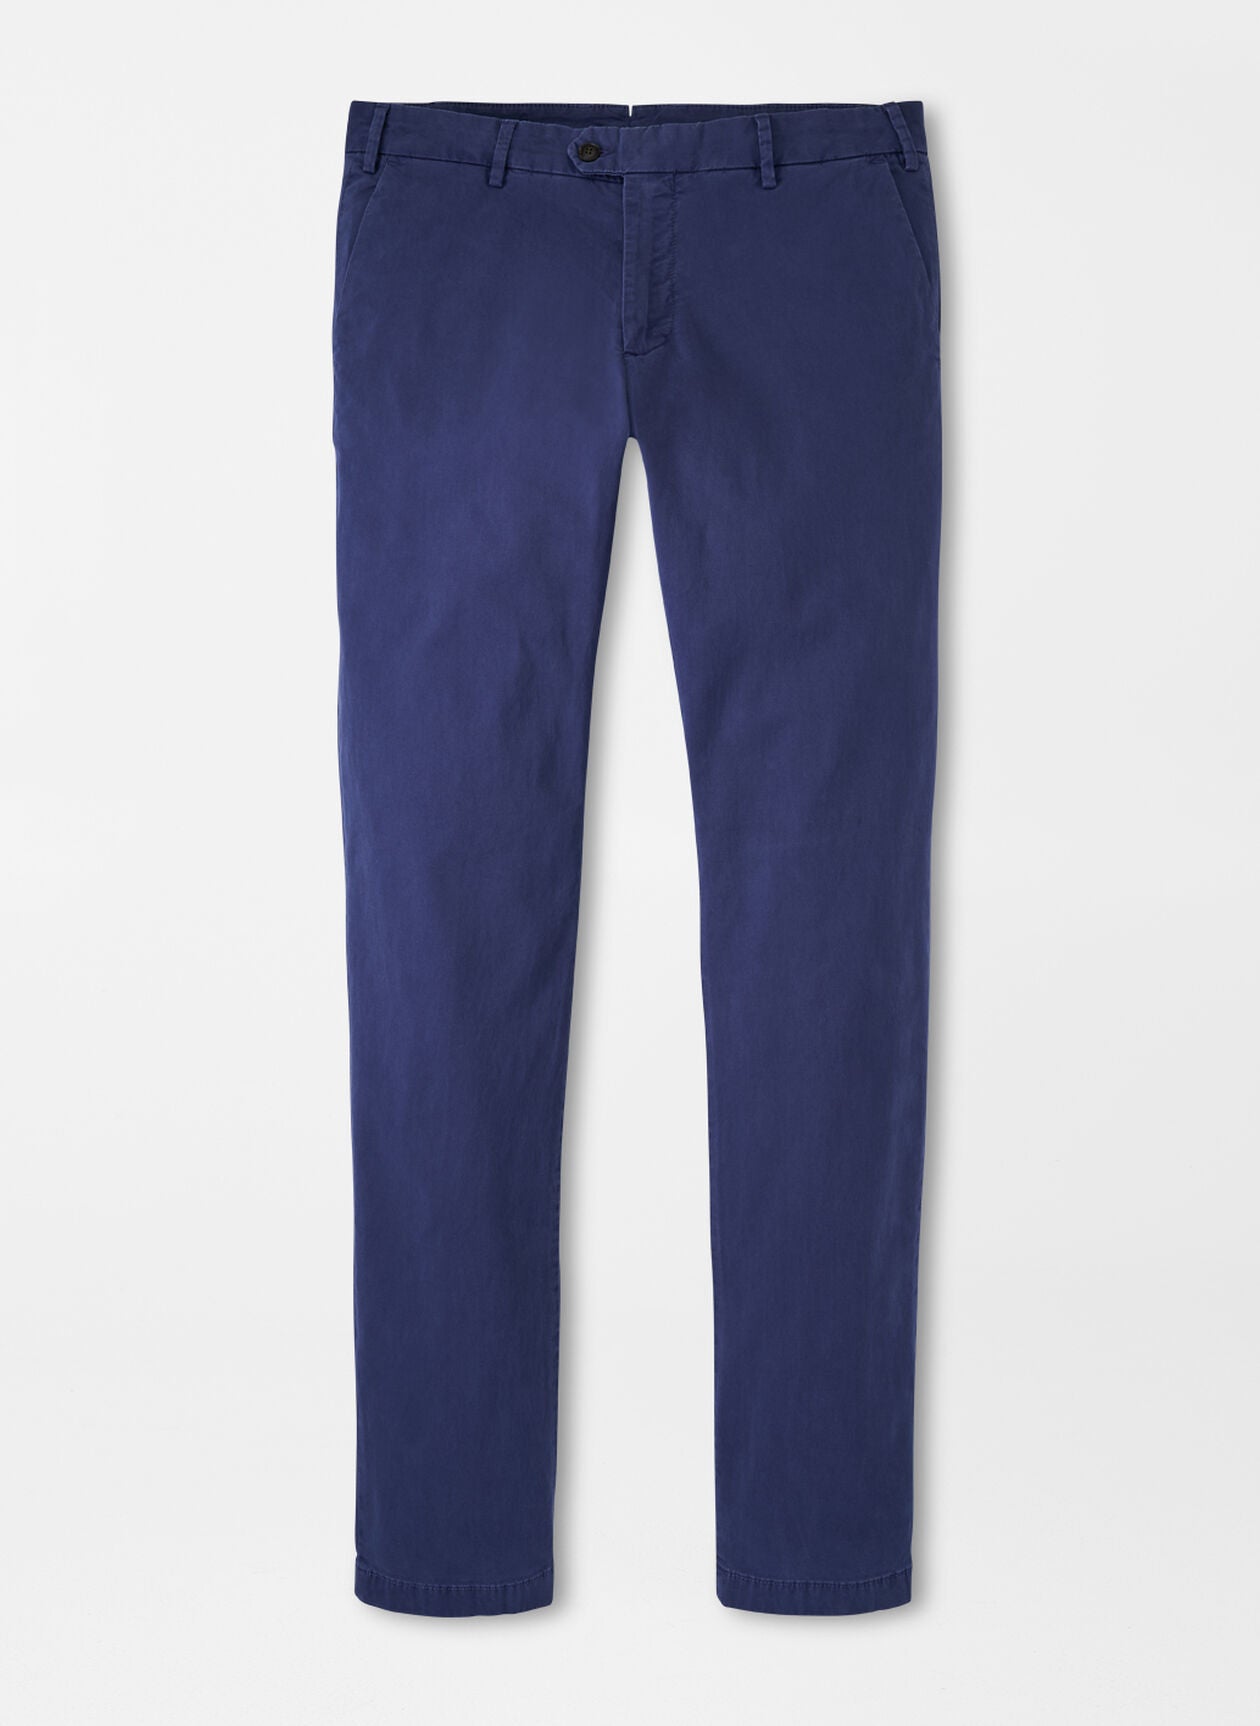 Concorde Garment-Dyed Flat Front Trouser